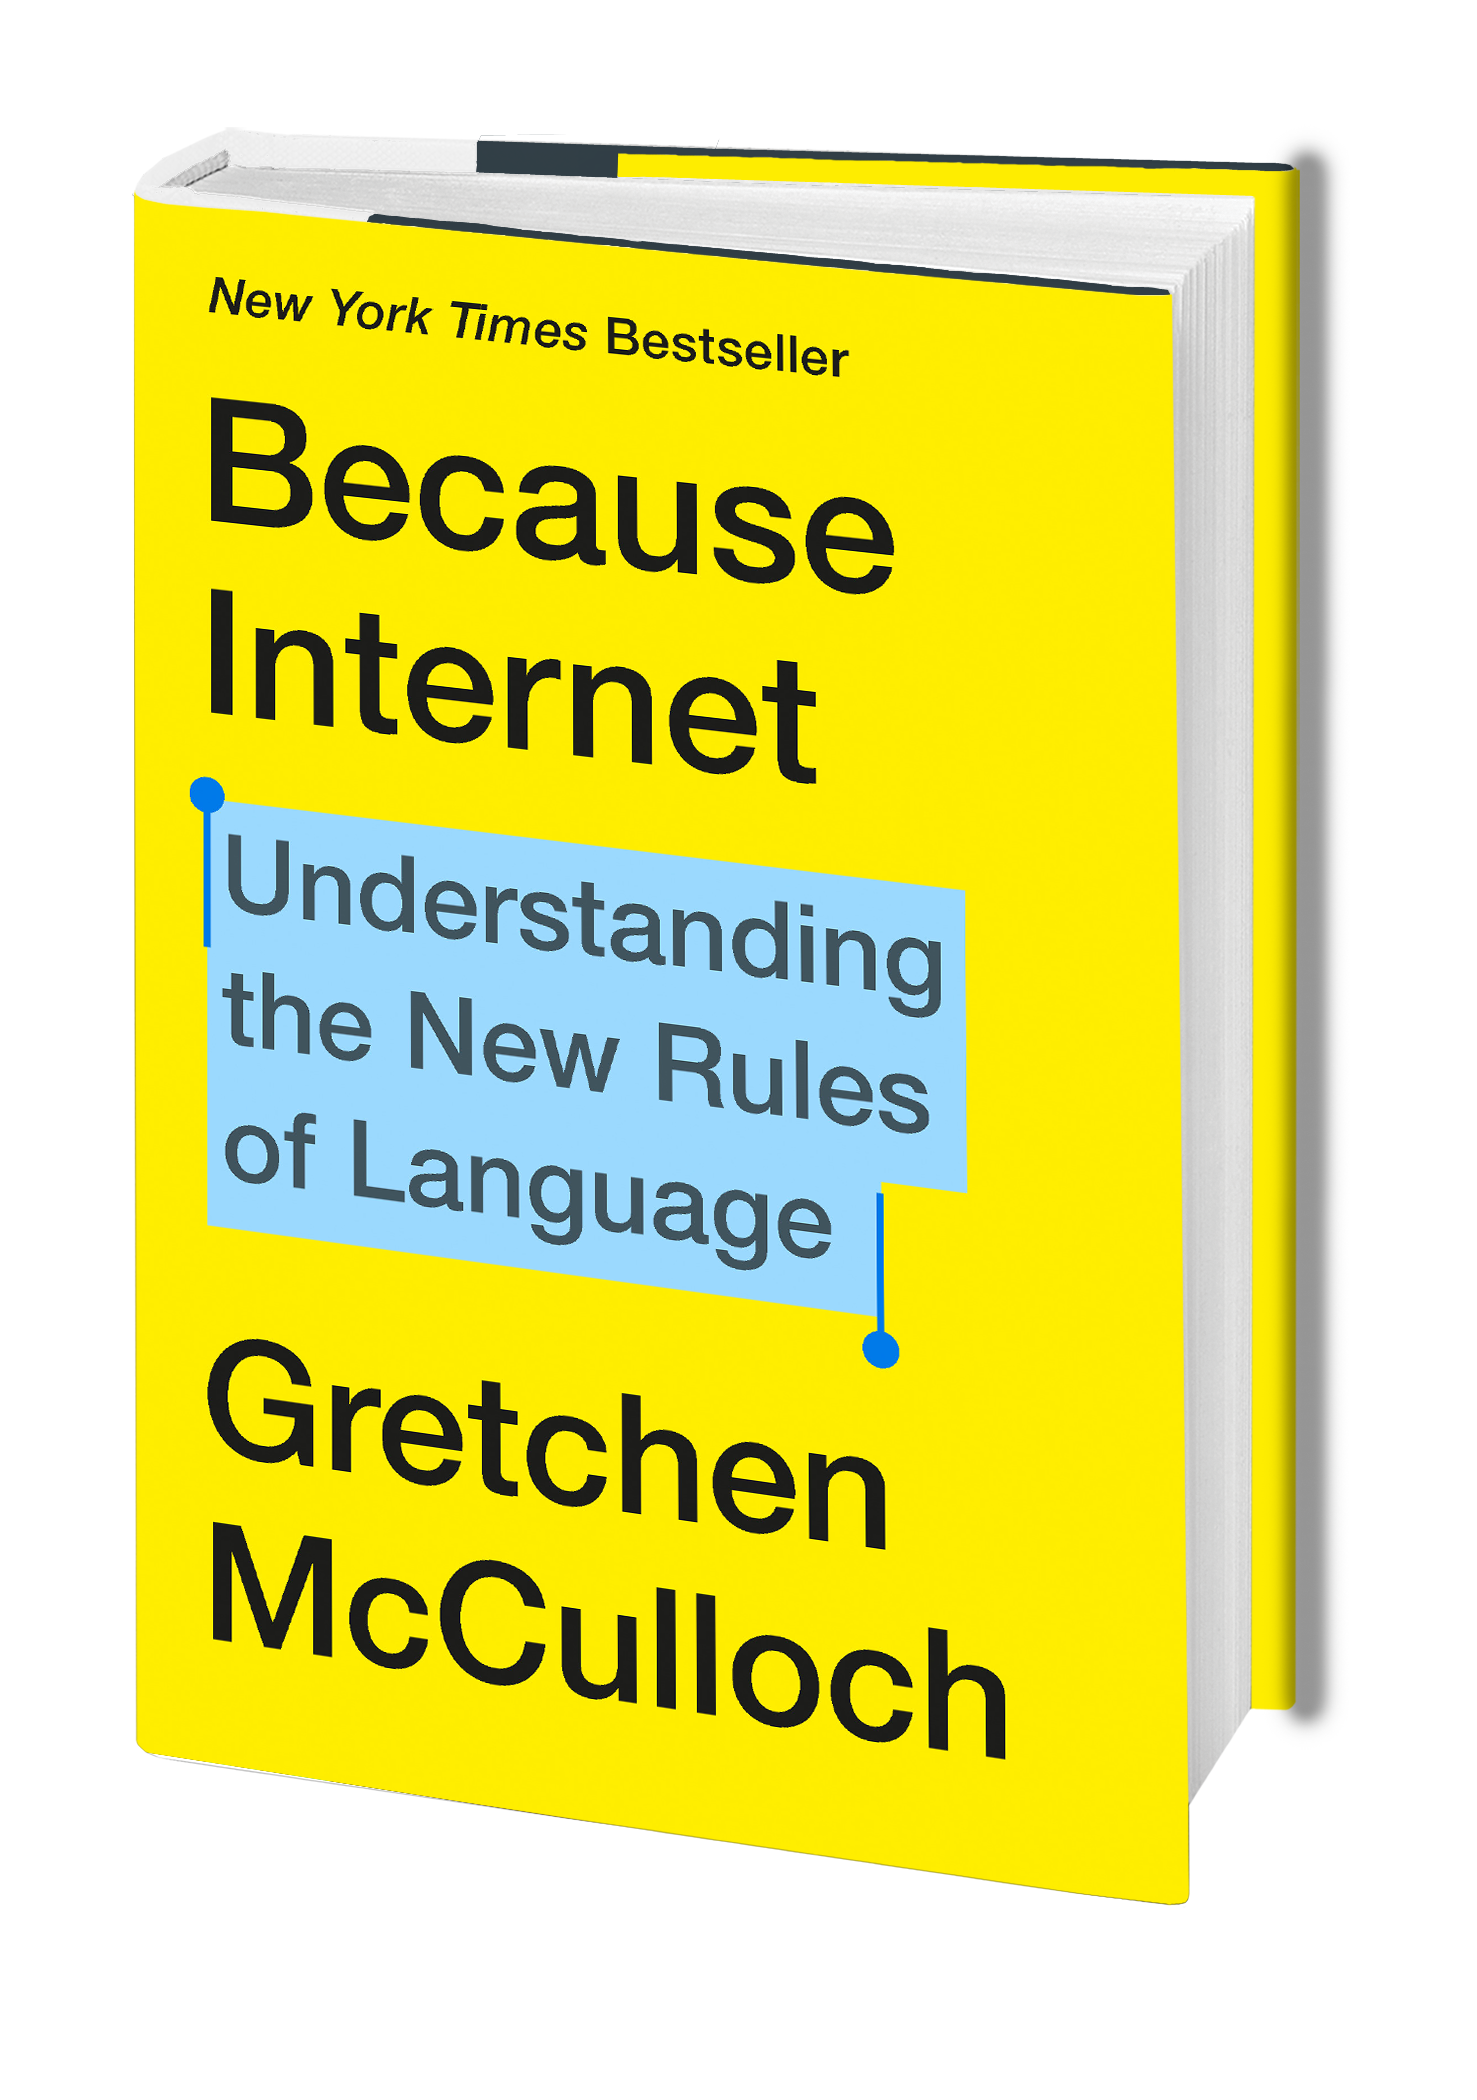 Because Internet: Understanding the New Rules of Language (New York Times bestseller)